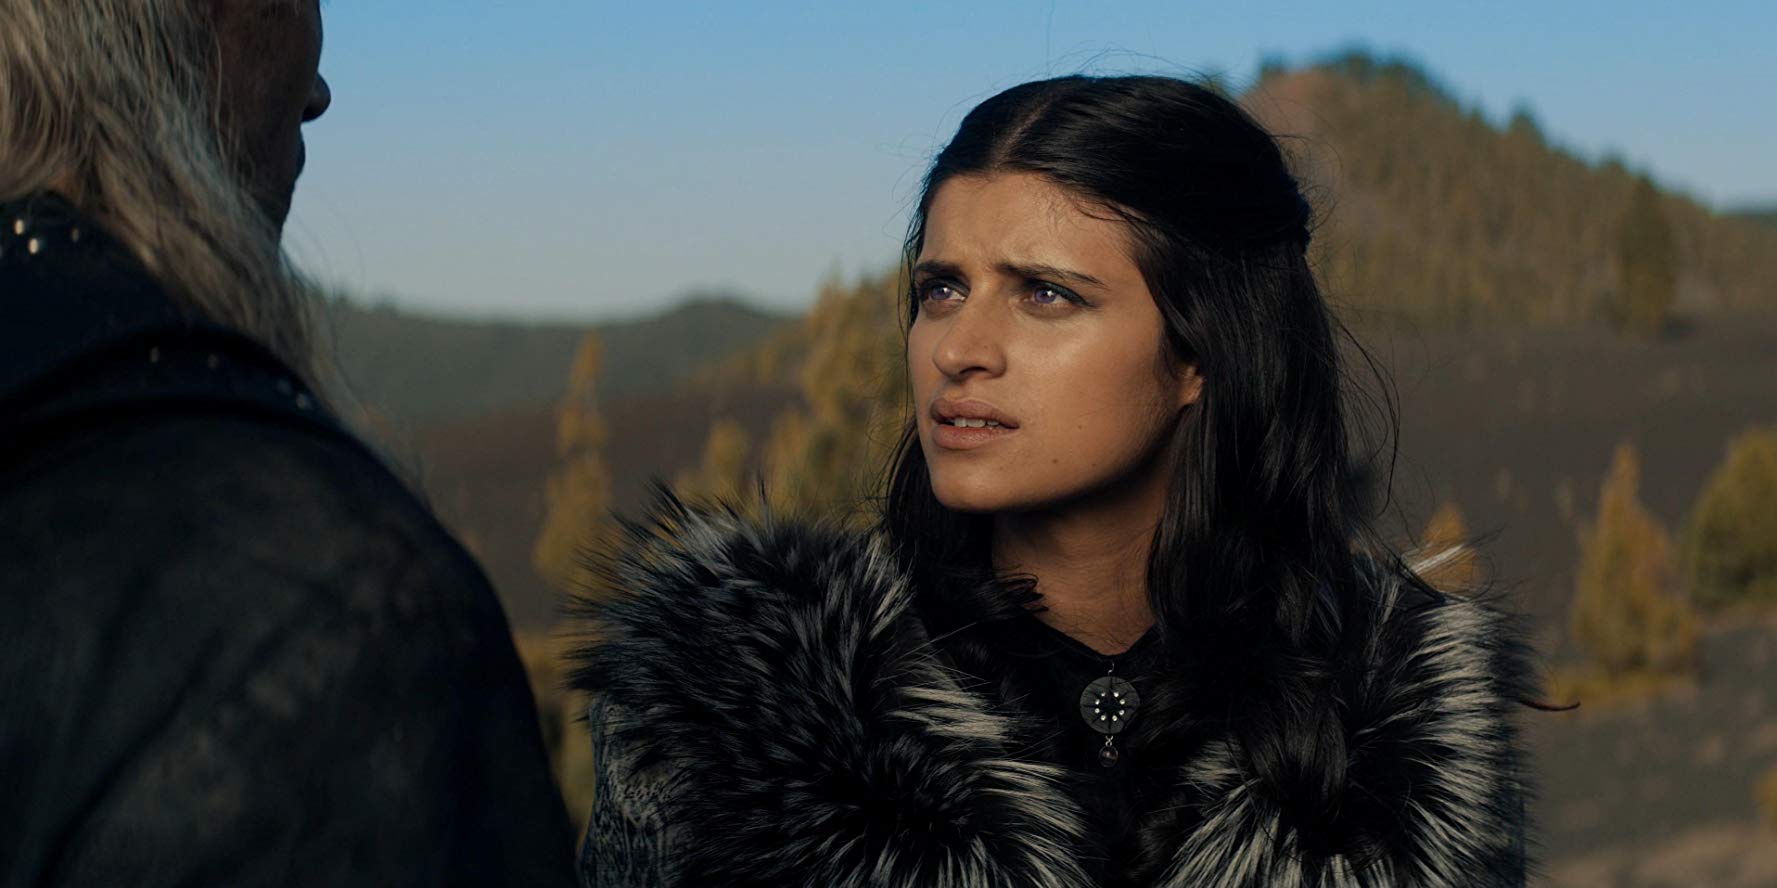 Yennefer of Vengerberg, played by Anya Chalotra, in Netflix's series The Witcher